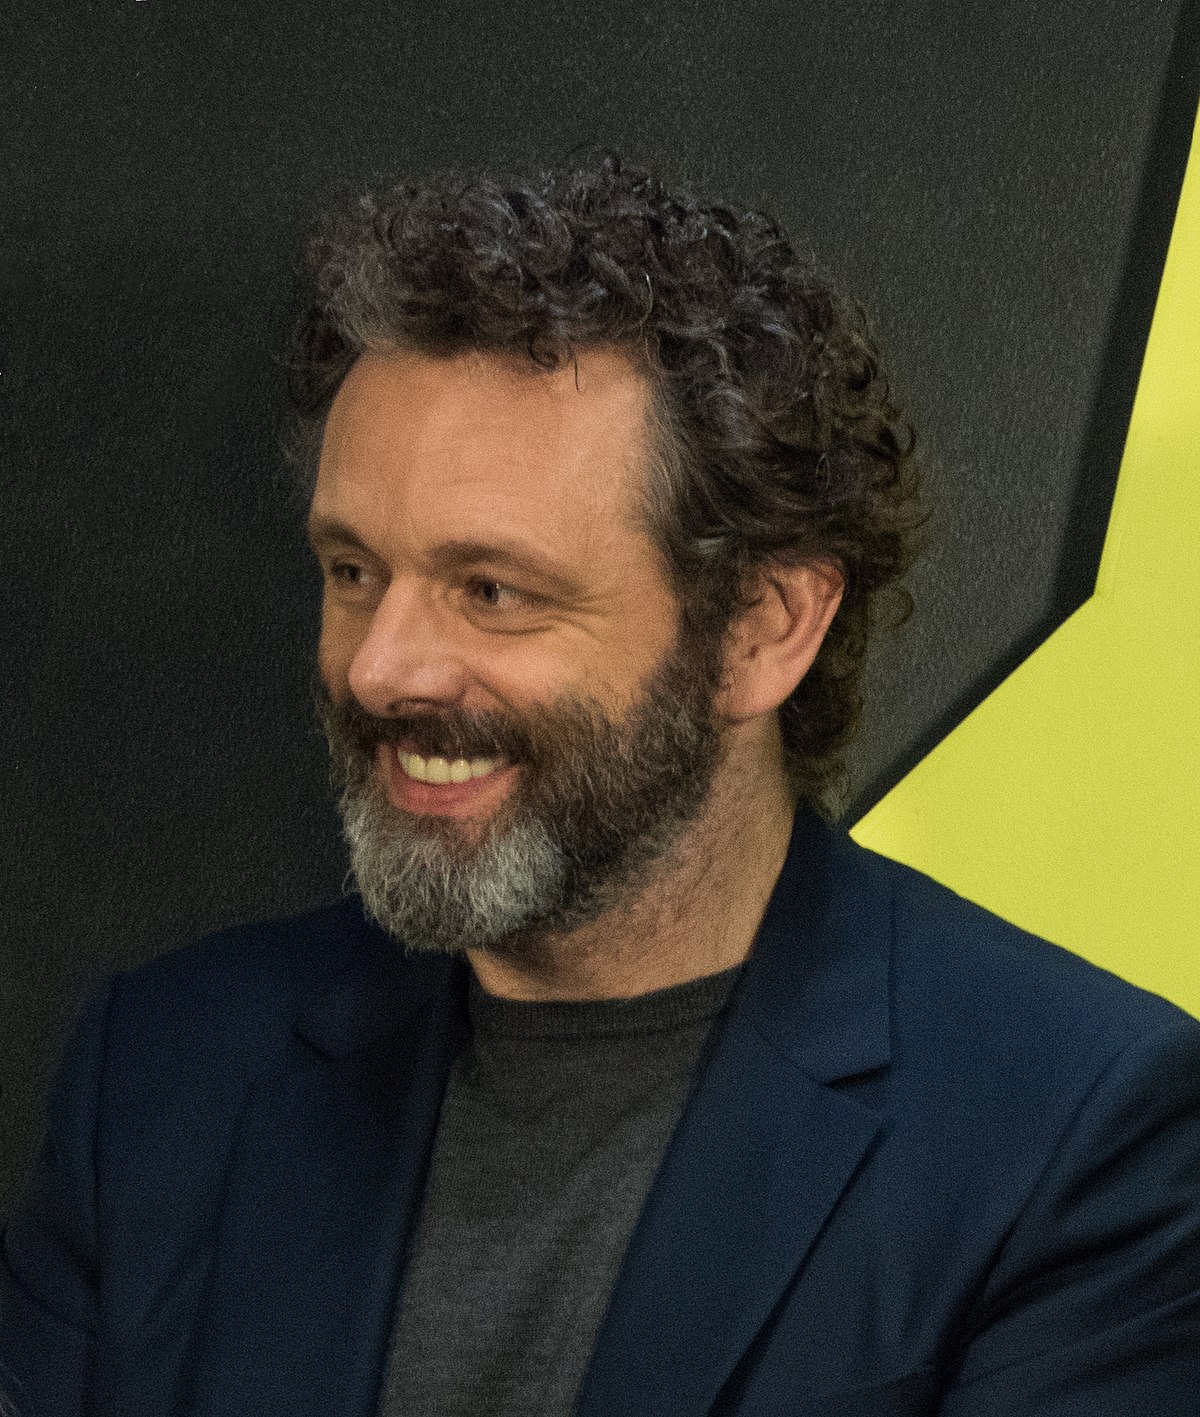 The 53-year old son of father Meyrick Sheen and mother Irene Sheen Michael Sheen in 2022 photo. Michael Sheen earned a  million dollar salary - leaving the net worth at 3 million in 2022